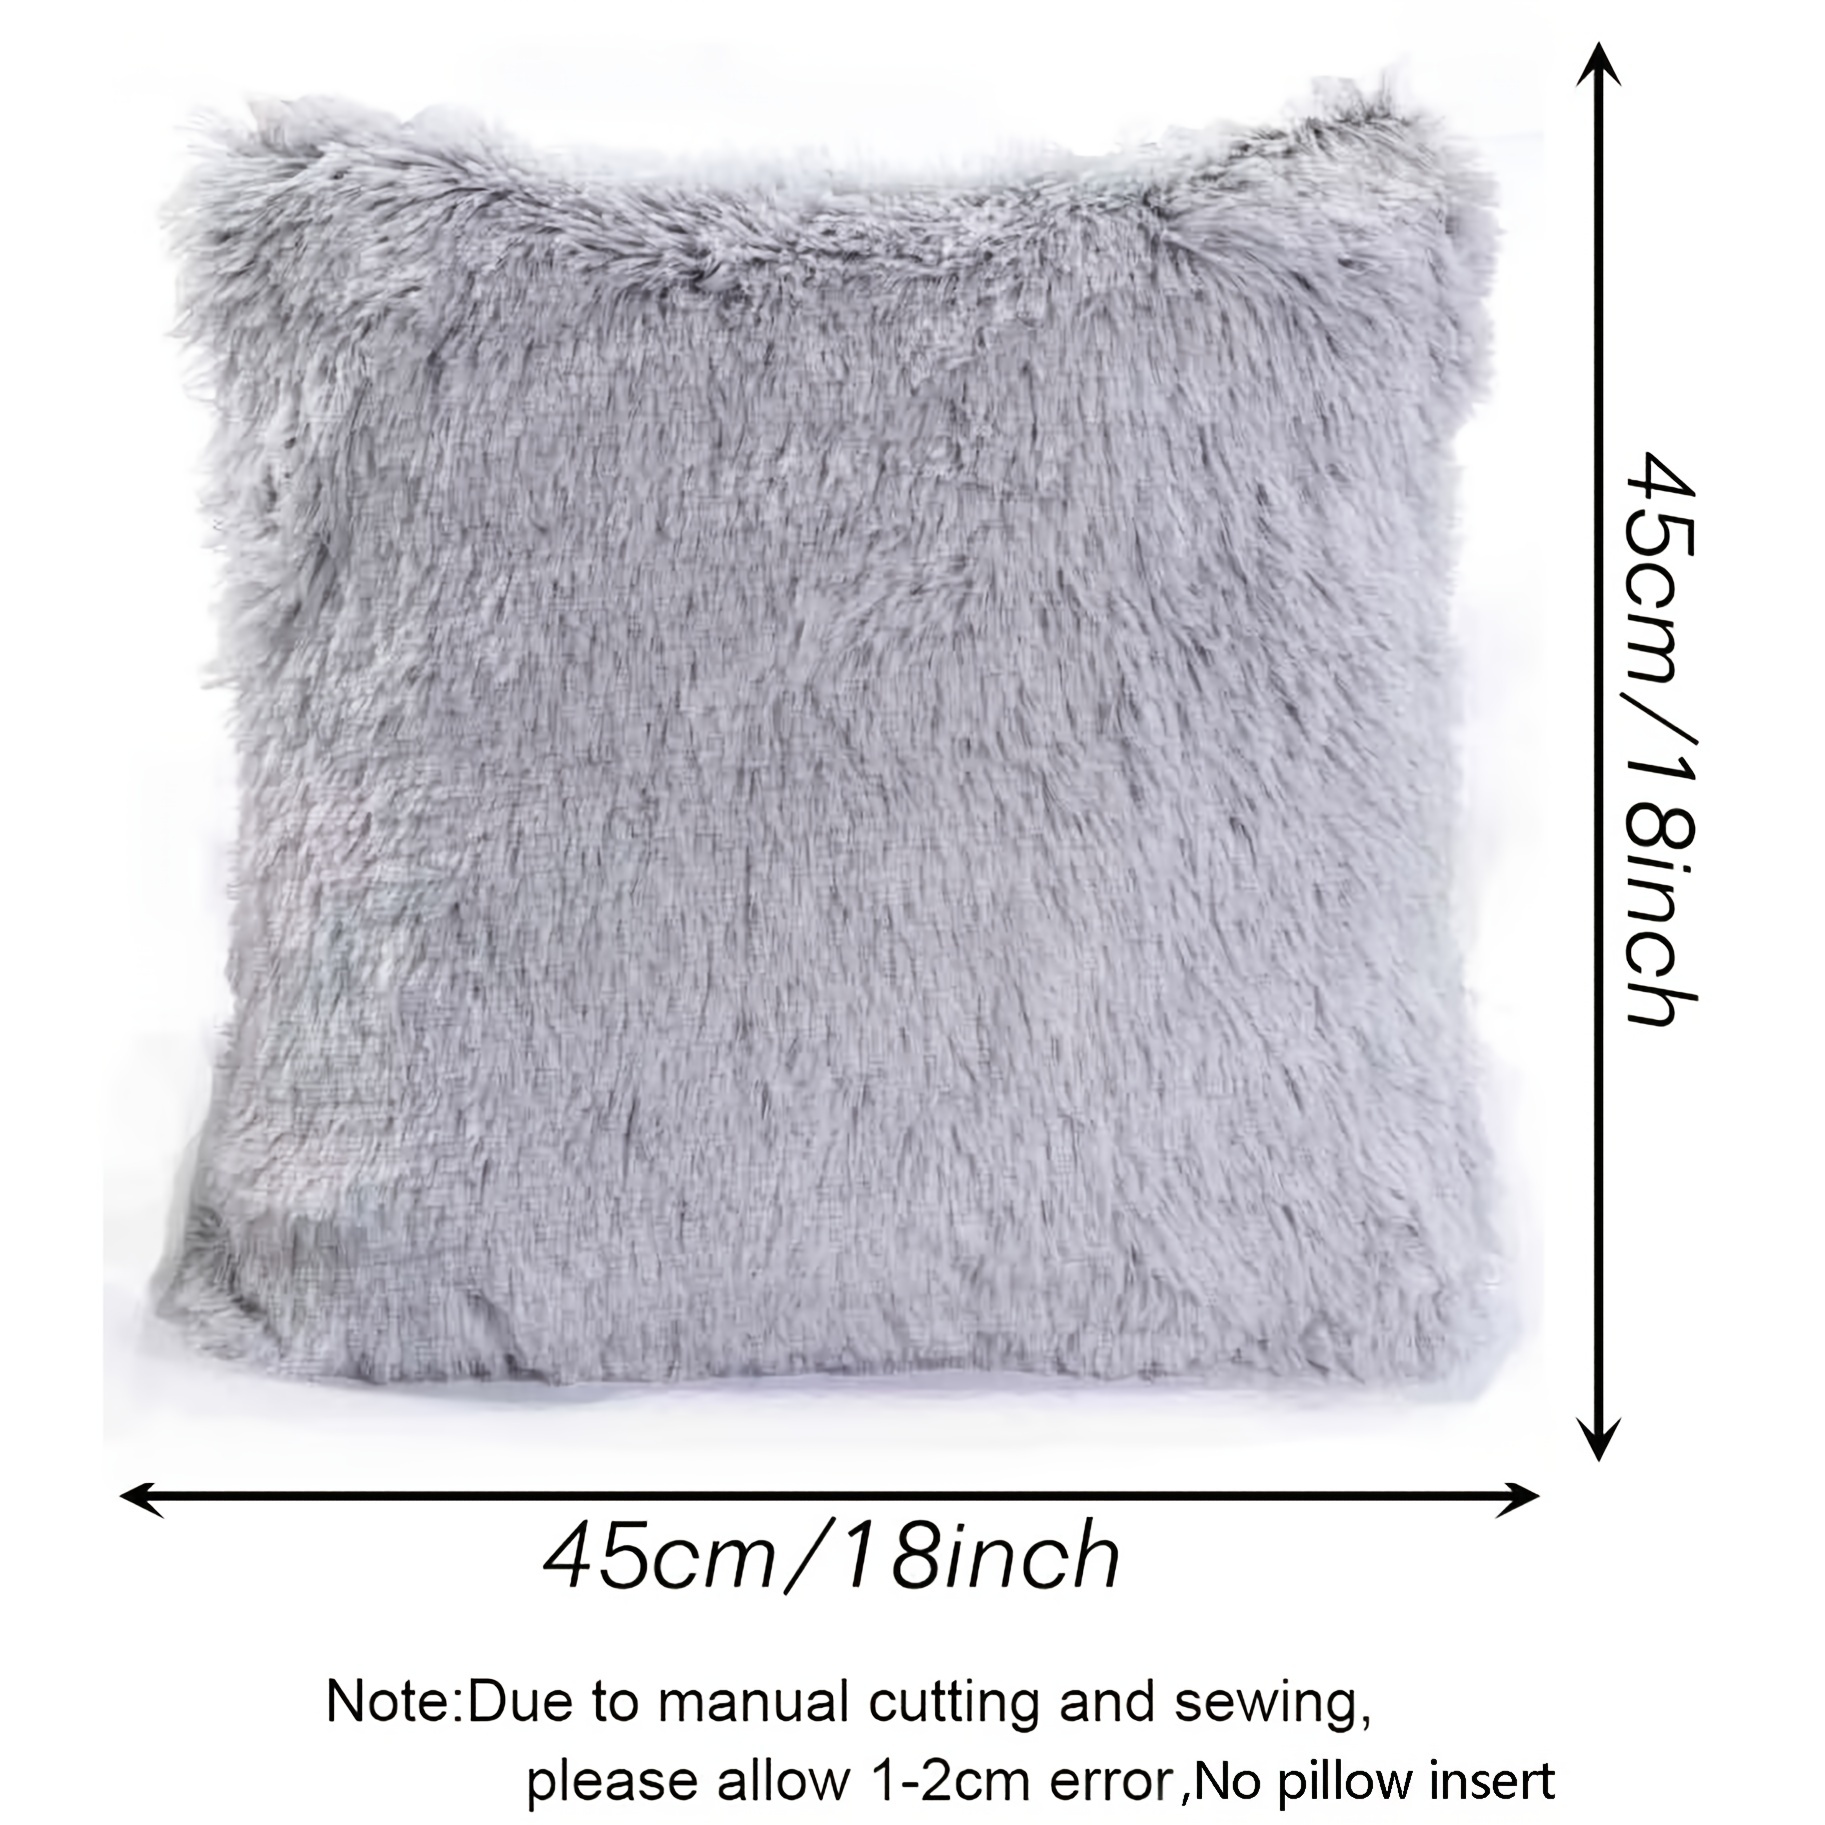 Large Plain Fluffy Plush Cushion Covers Furry Throw Pillow Cases Home  Ornaments